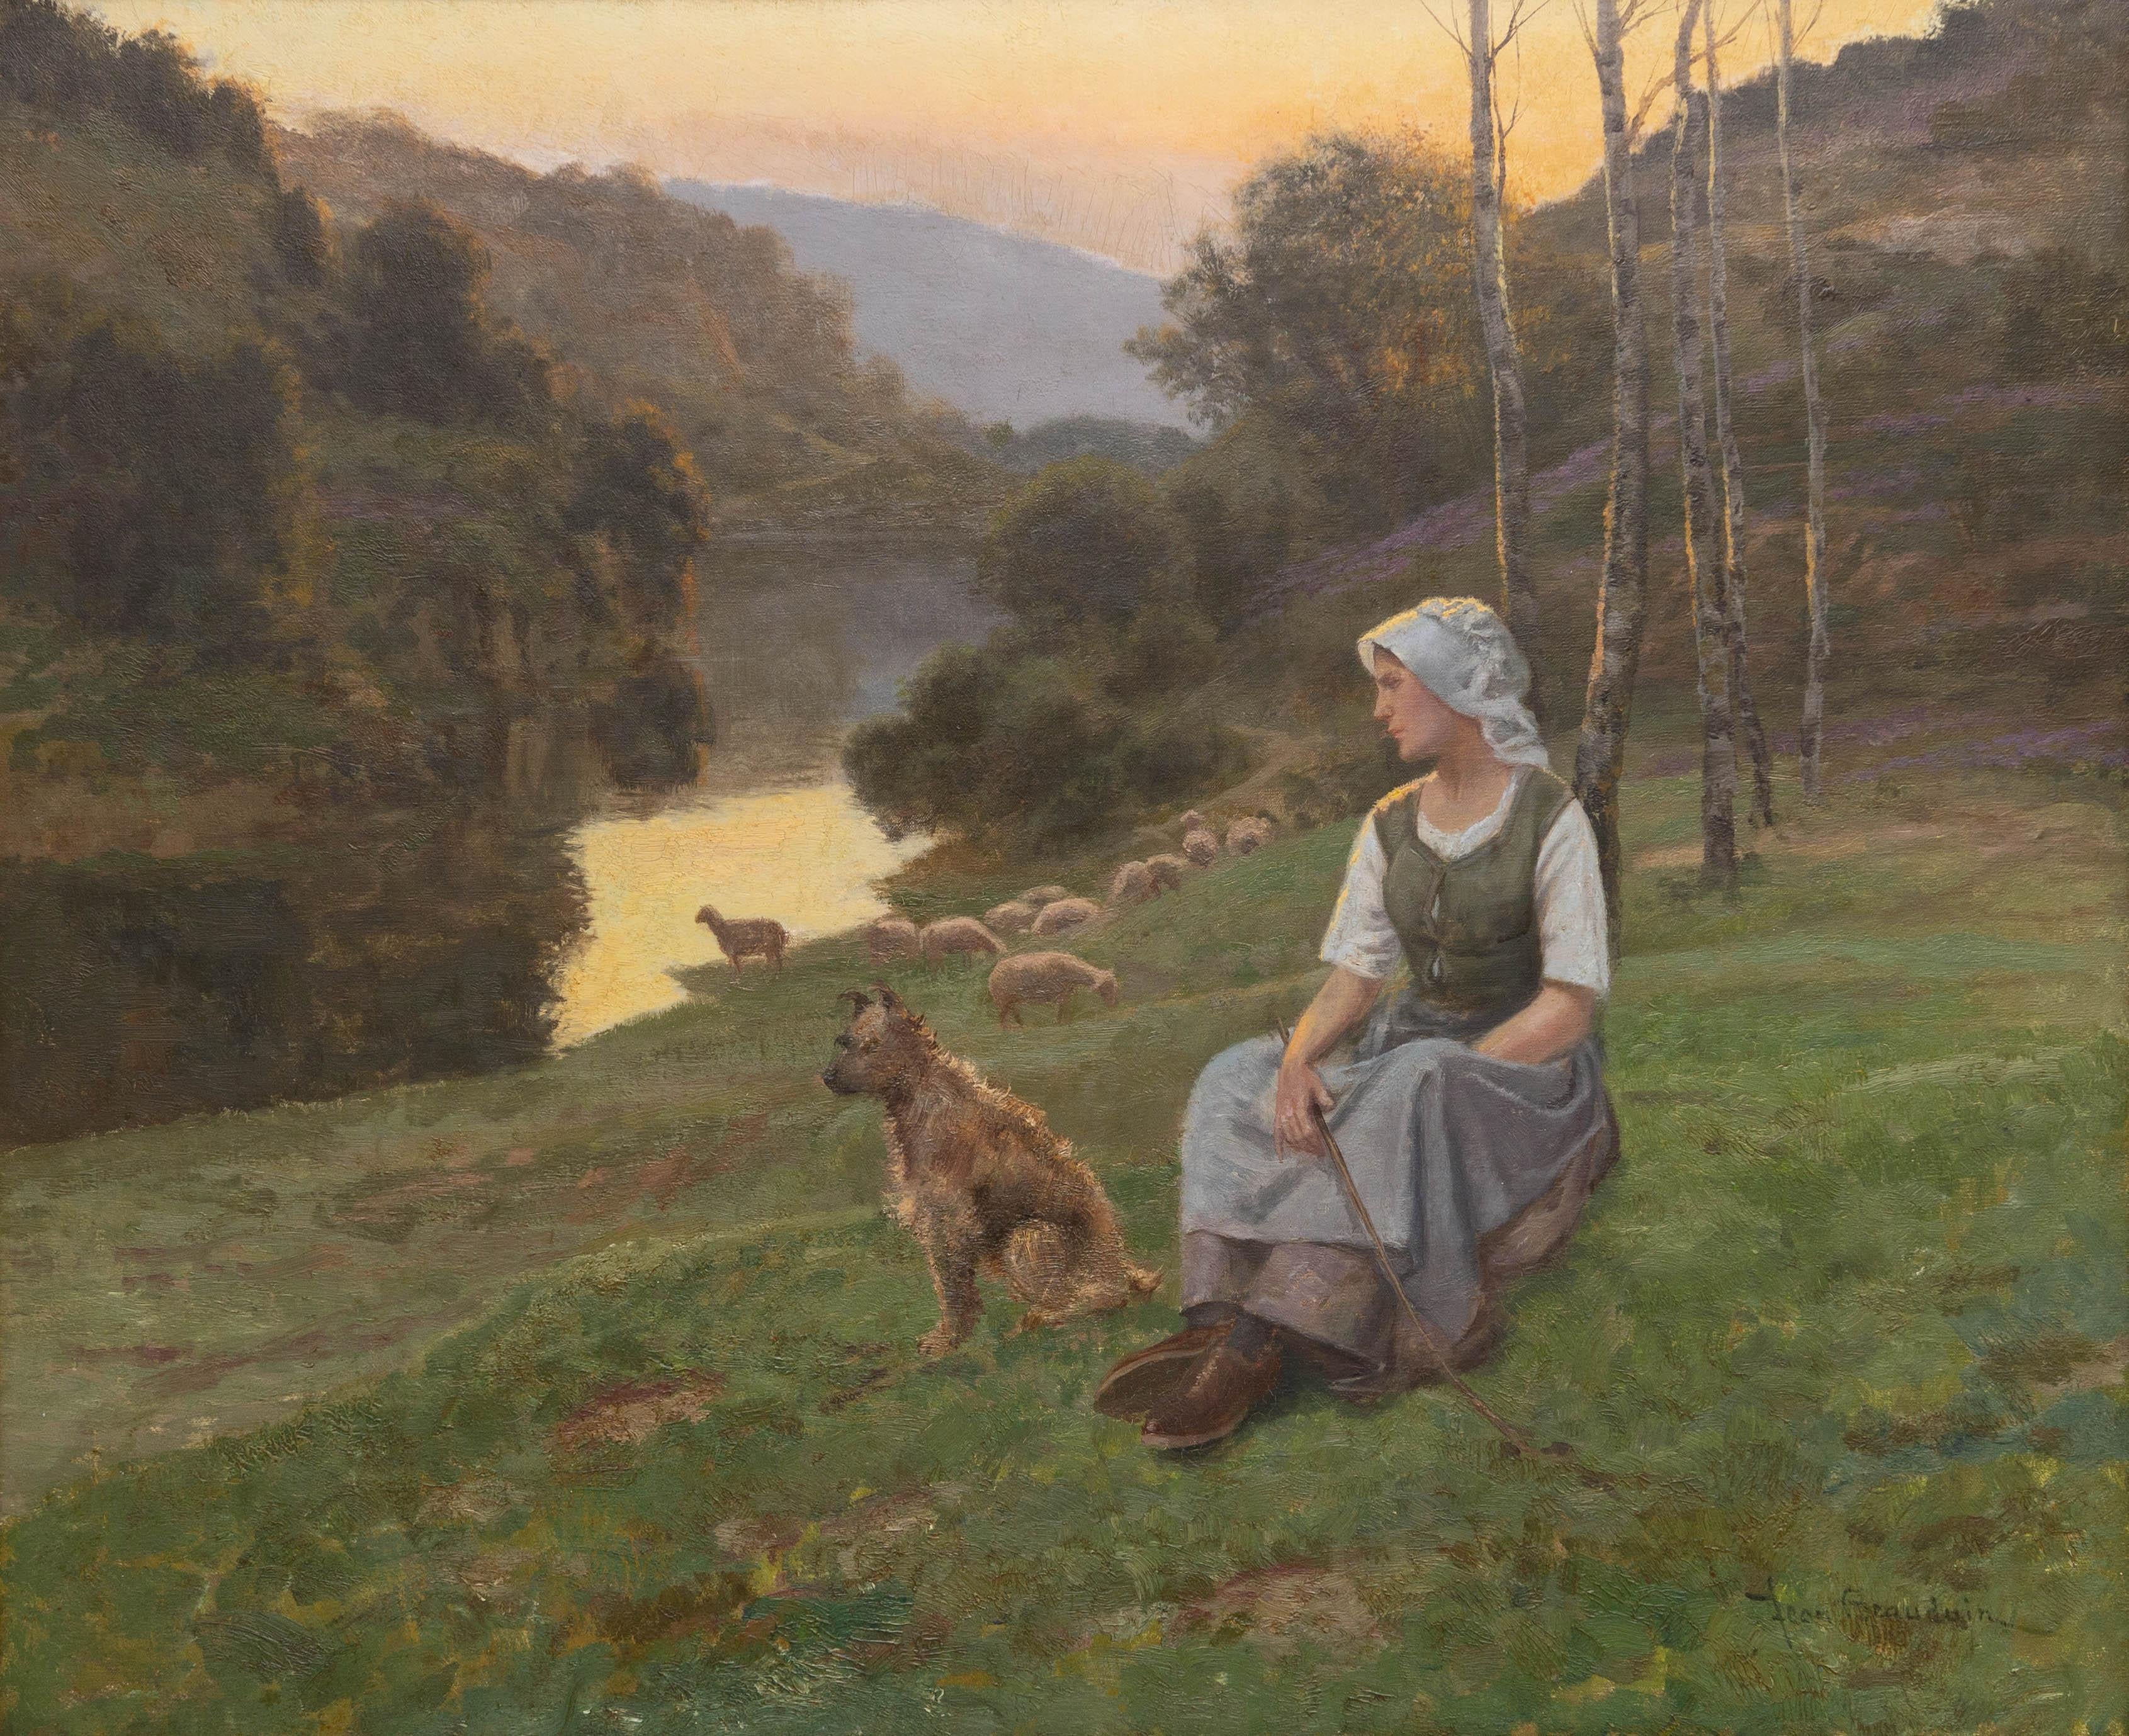 French shepherdess at twilight by Jean Beauduin (1851-1916). Oil on canvas mounted on board. Original Barbizon frame. I believe the dog is a bergere Picard. The bergere Picard or Picardy Shepherd is a French herding originating in Picardy. These